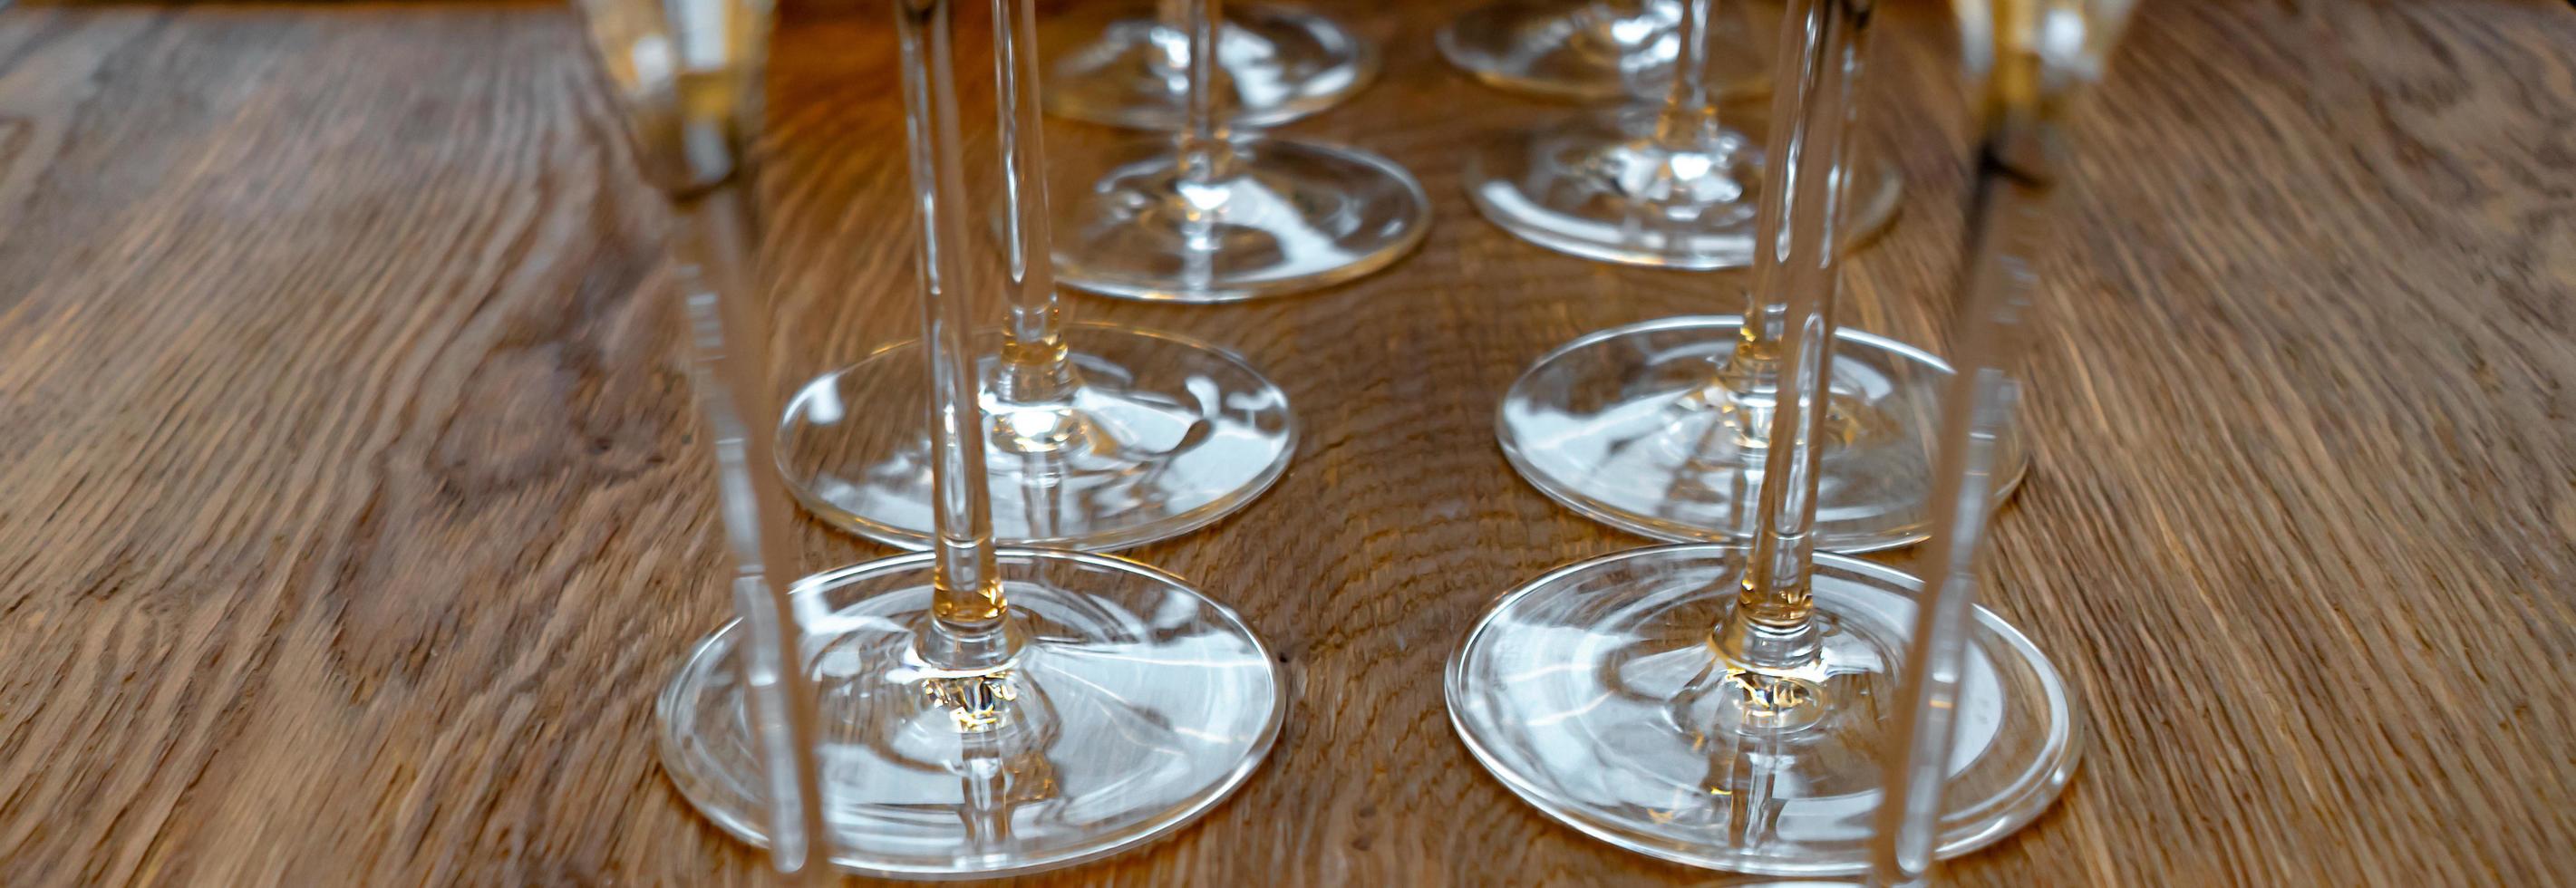 Two rows of wine glasses on a wooden table photo